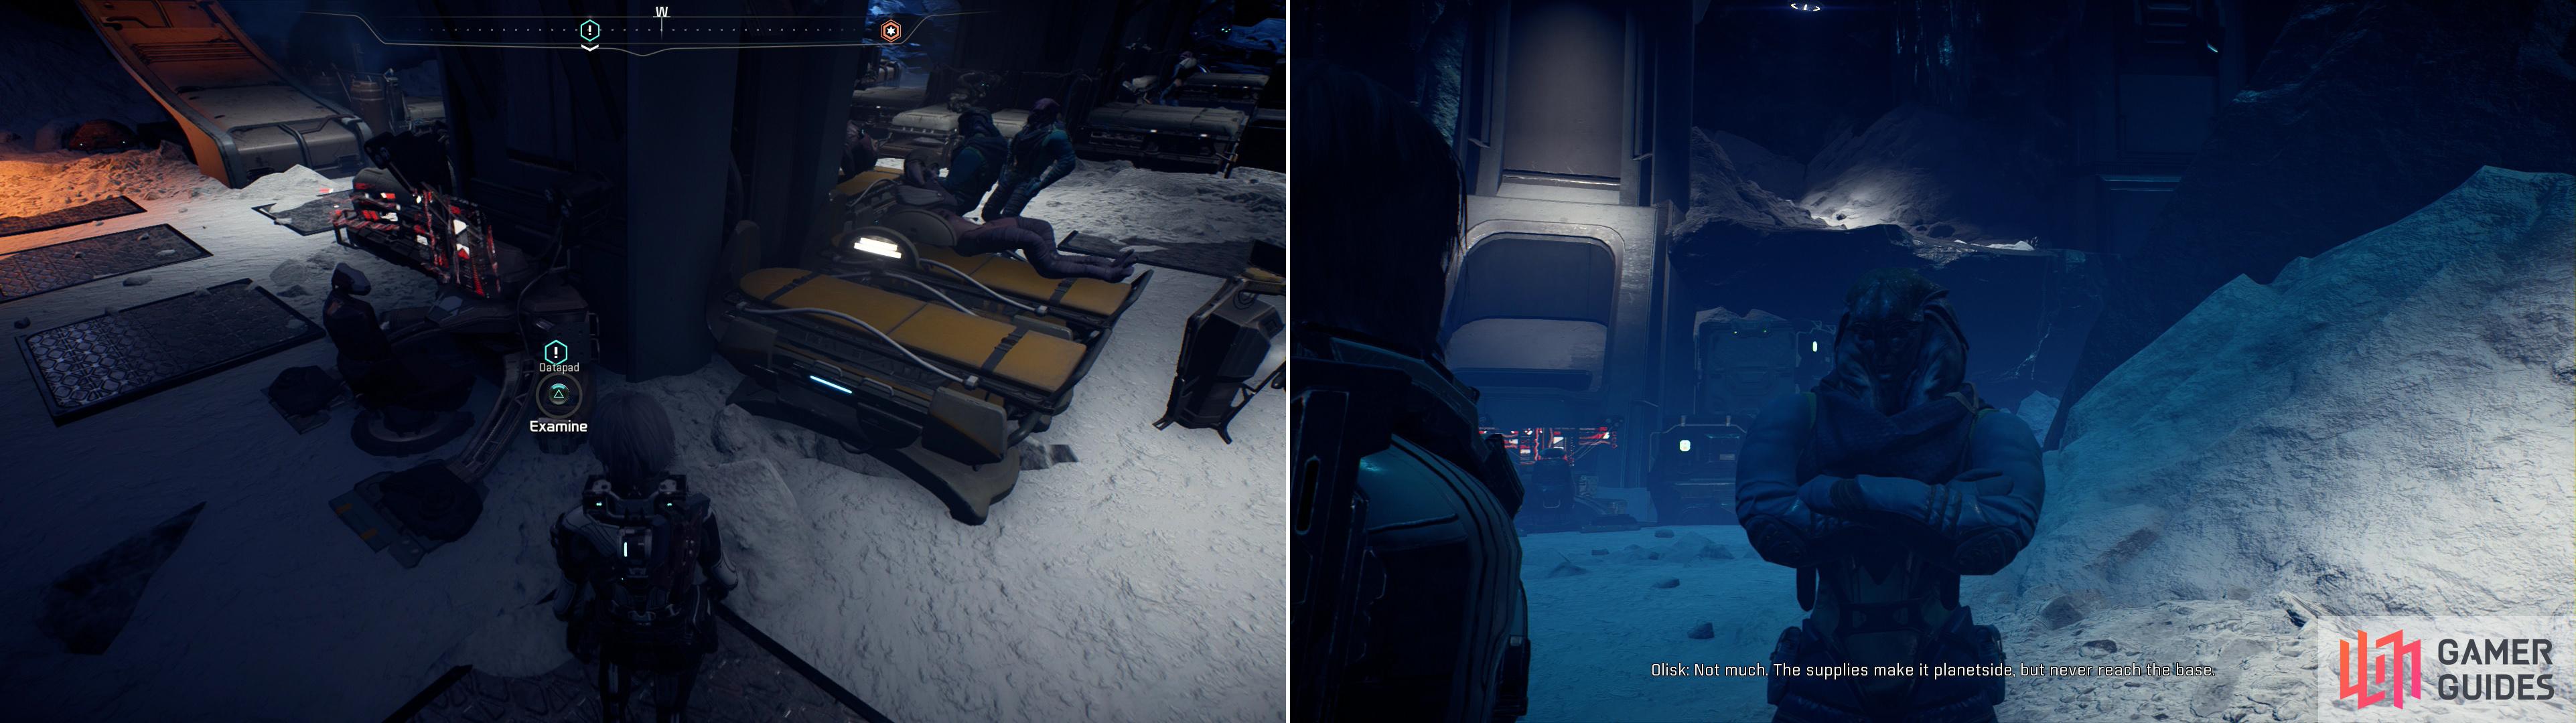 Find a Datapad in the Resistance Base (left) to learn about some missing supplies, then talk to Olisk to will allow you to look into the missing supplies (right).